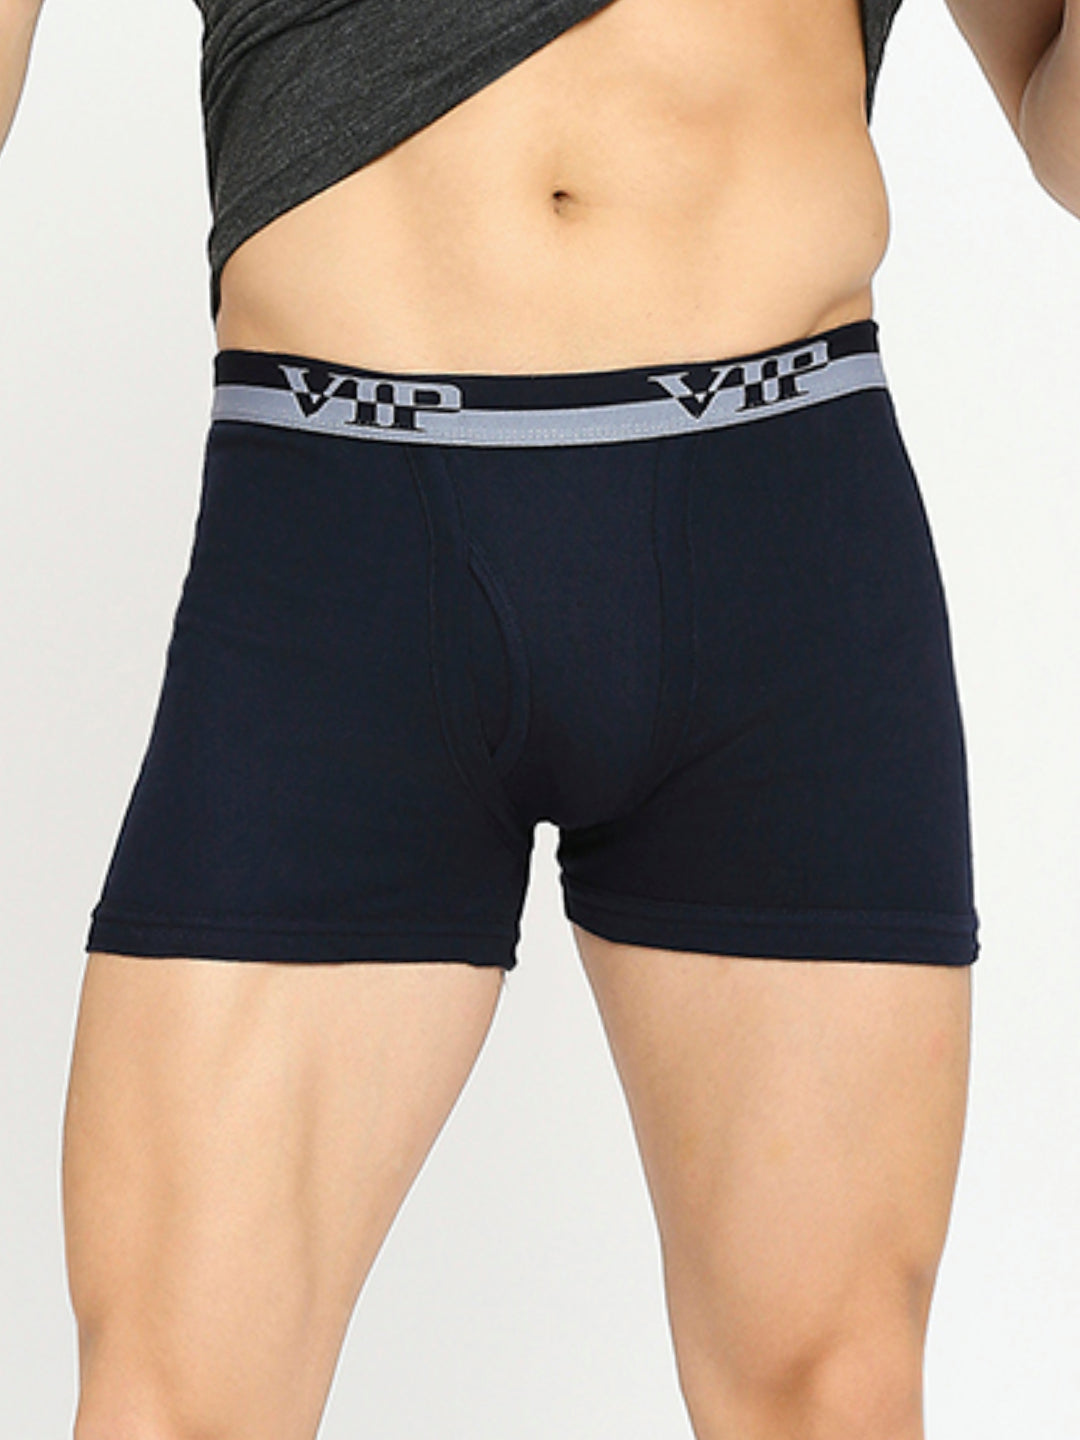 VIP Ultra 100% Soft Cotton Trunks for Men | Assorted Colours - AS02